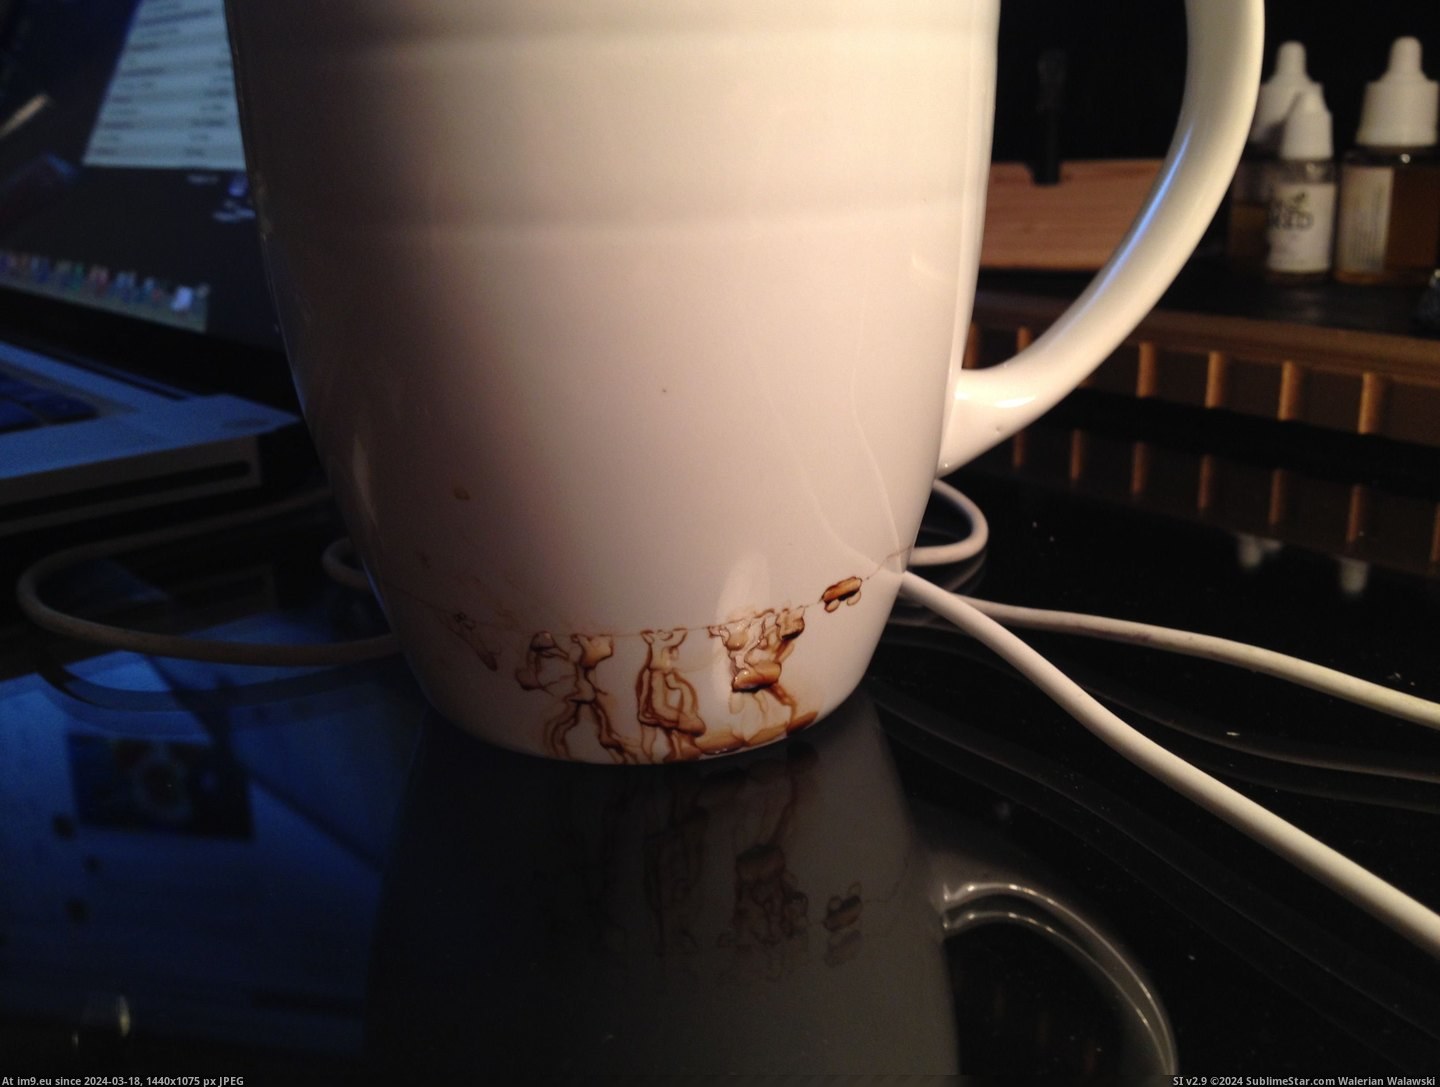 #Tiny #Coffee #Crack #Mug #Hour #Realize [Mildlyinteresting] Didn't realize my coffee mug had a tiny crack in it for about an hour. Pic. (Изображение из альбом My r/MILDLYINTERESTING favs))